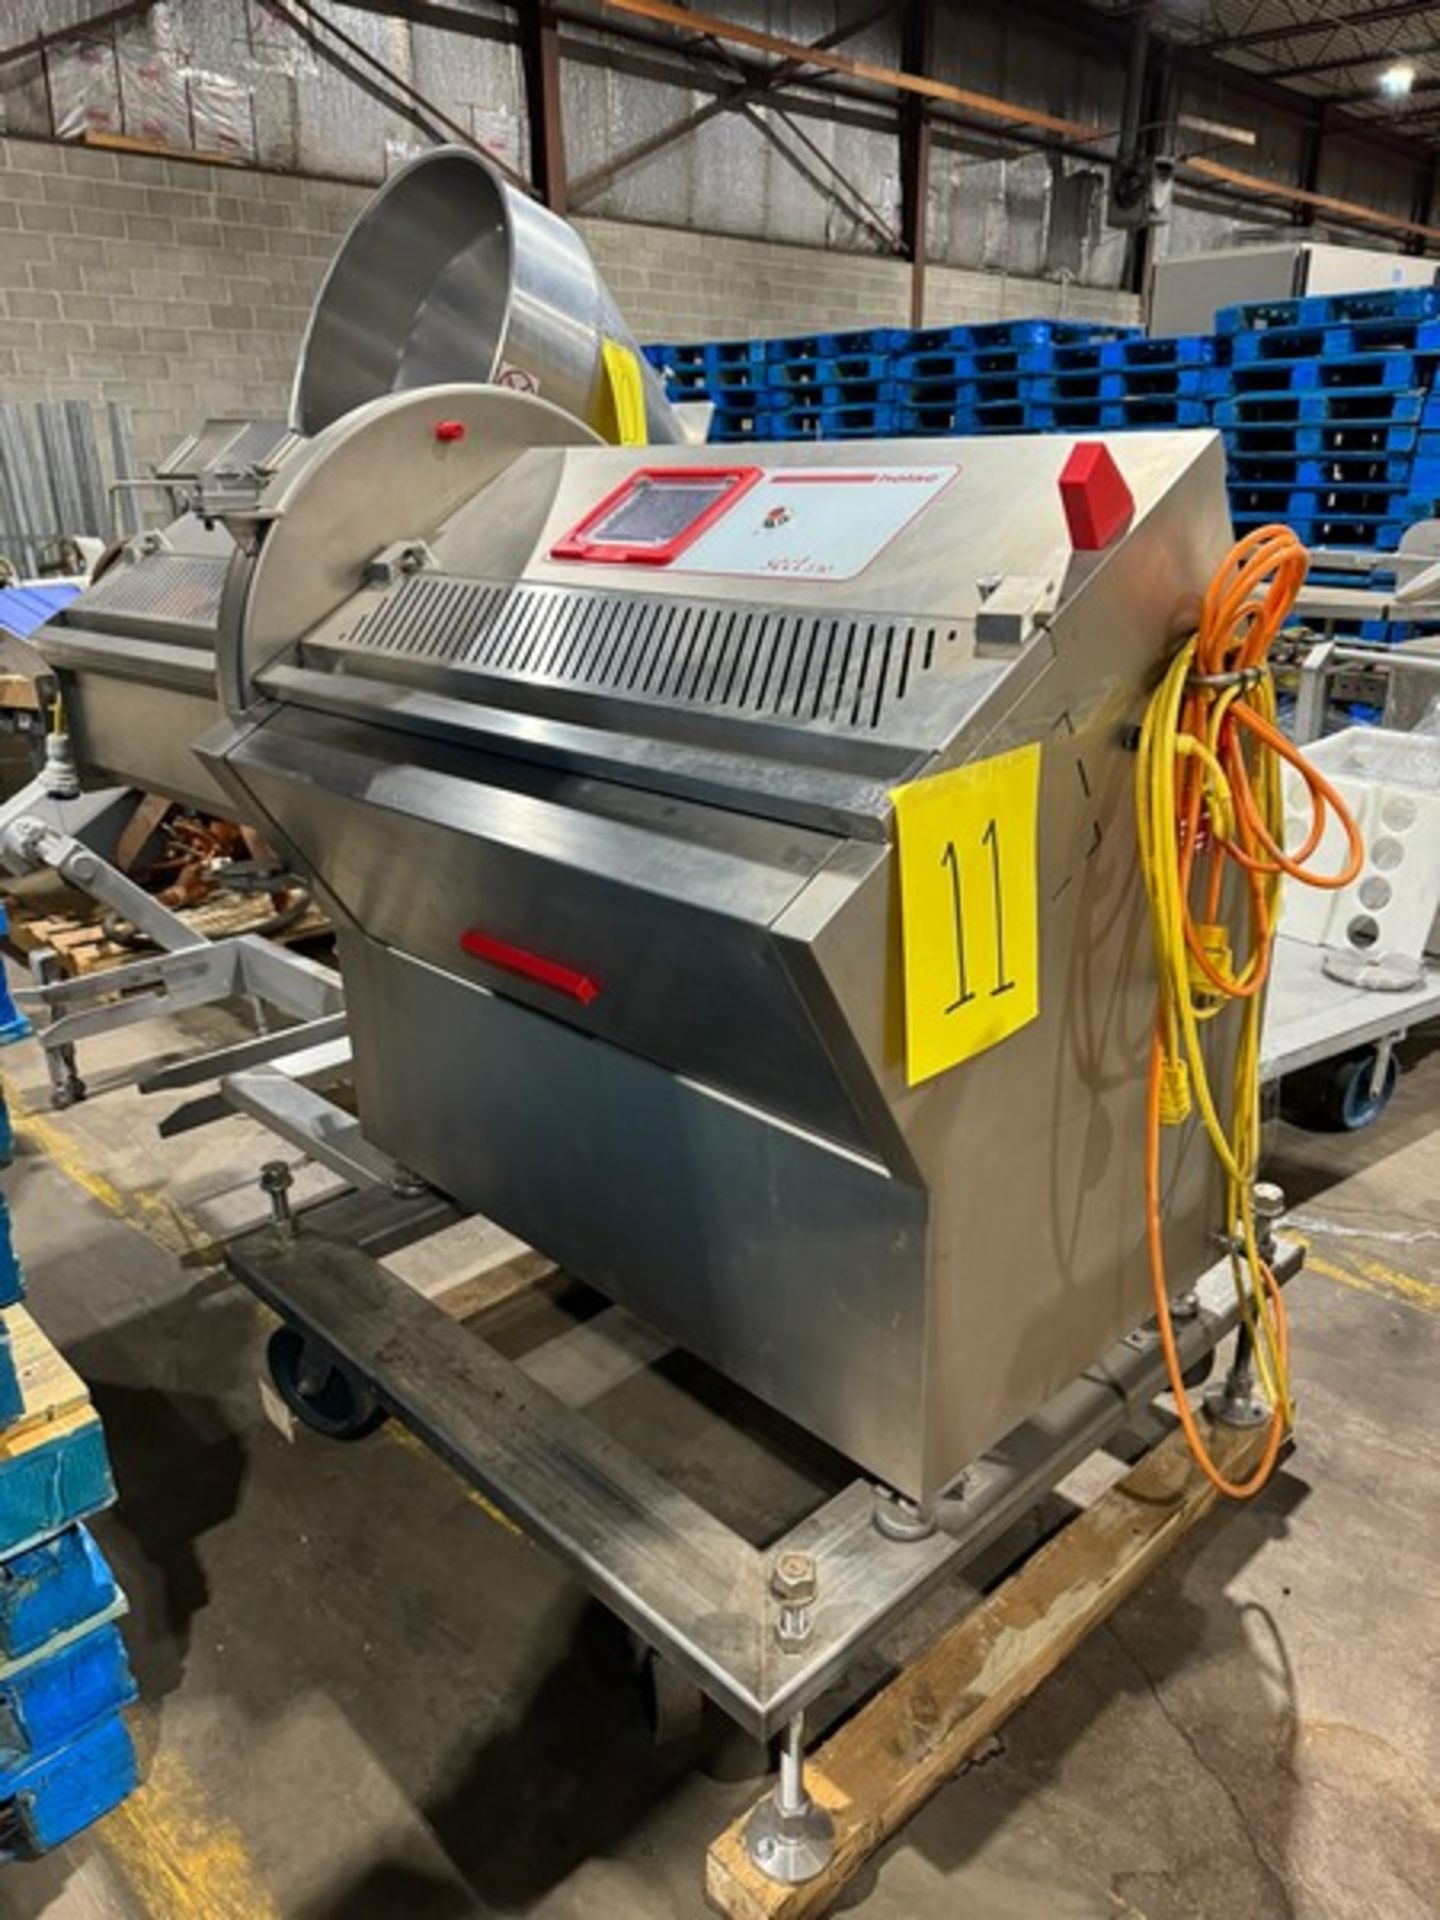 2017 Holac Slicer, Type: sect 230 TC, S/N 270-00-89, 440 Volts (RIGGING, LOADING, & SITE